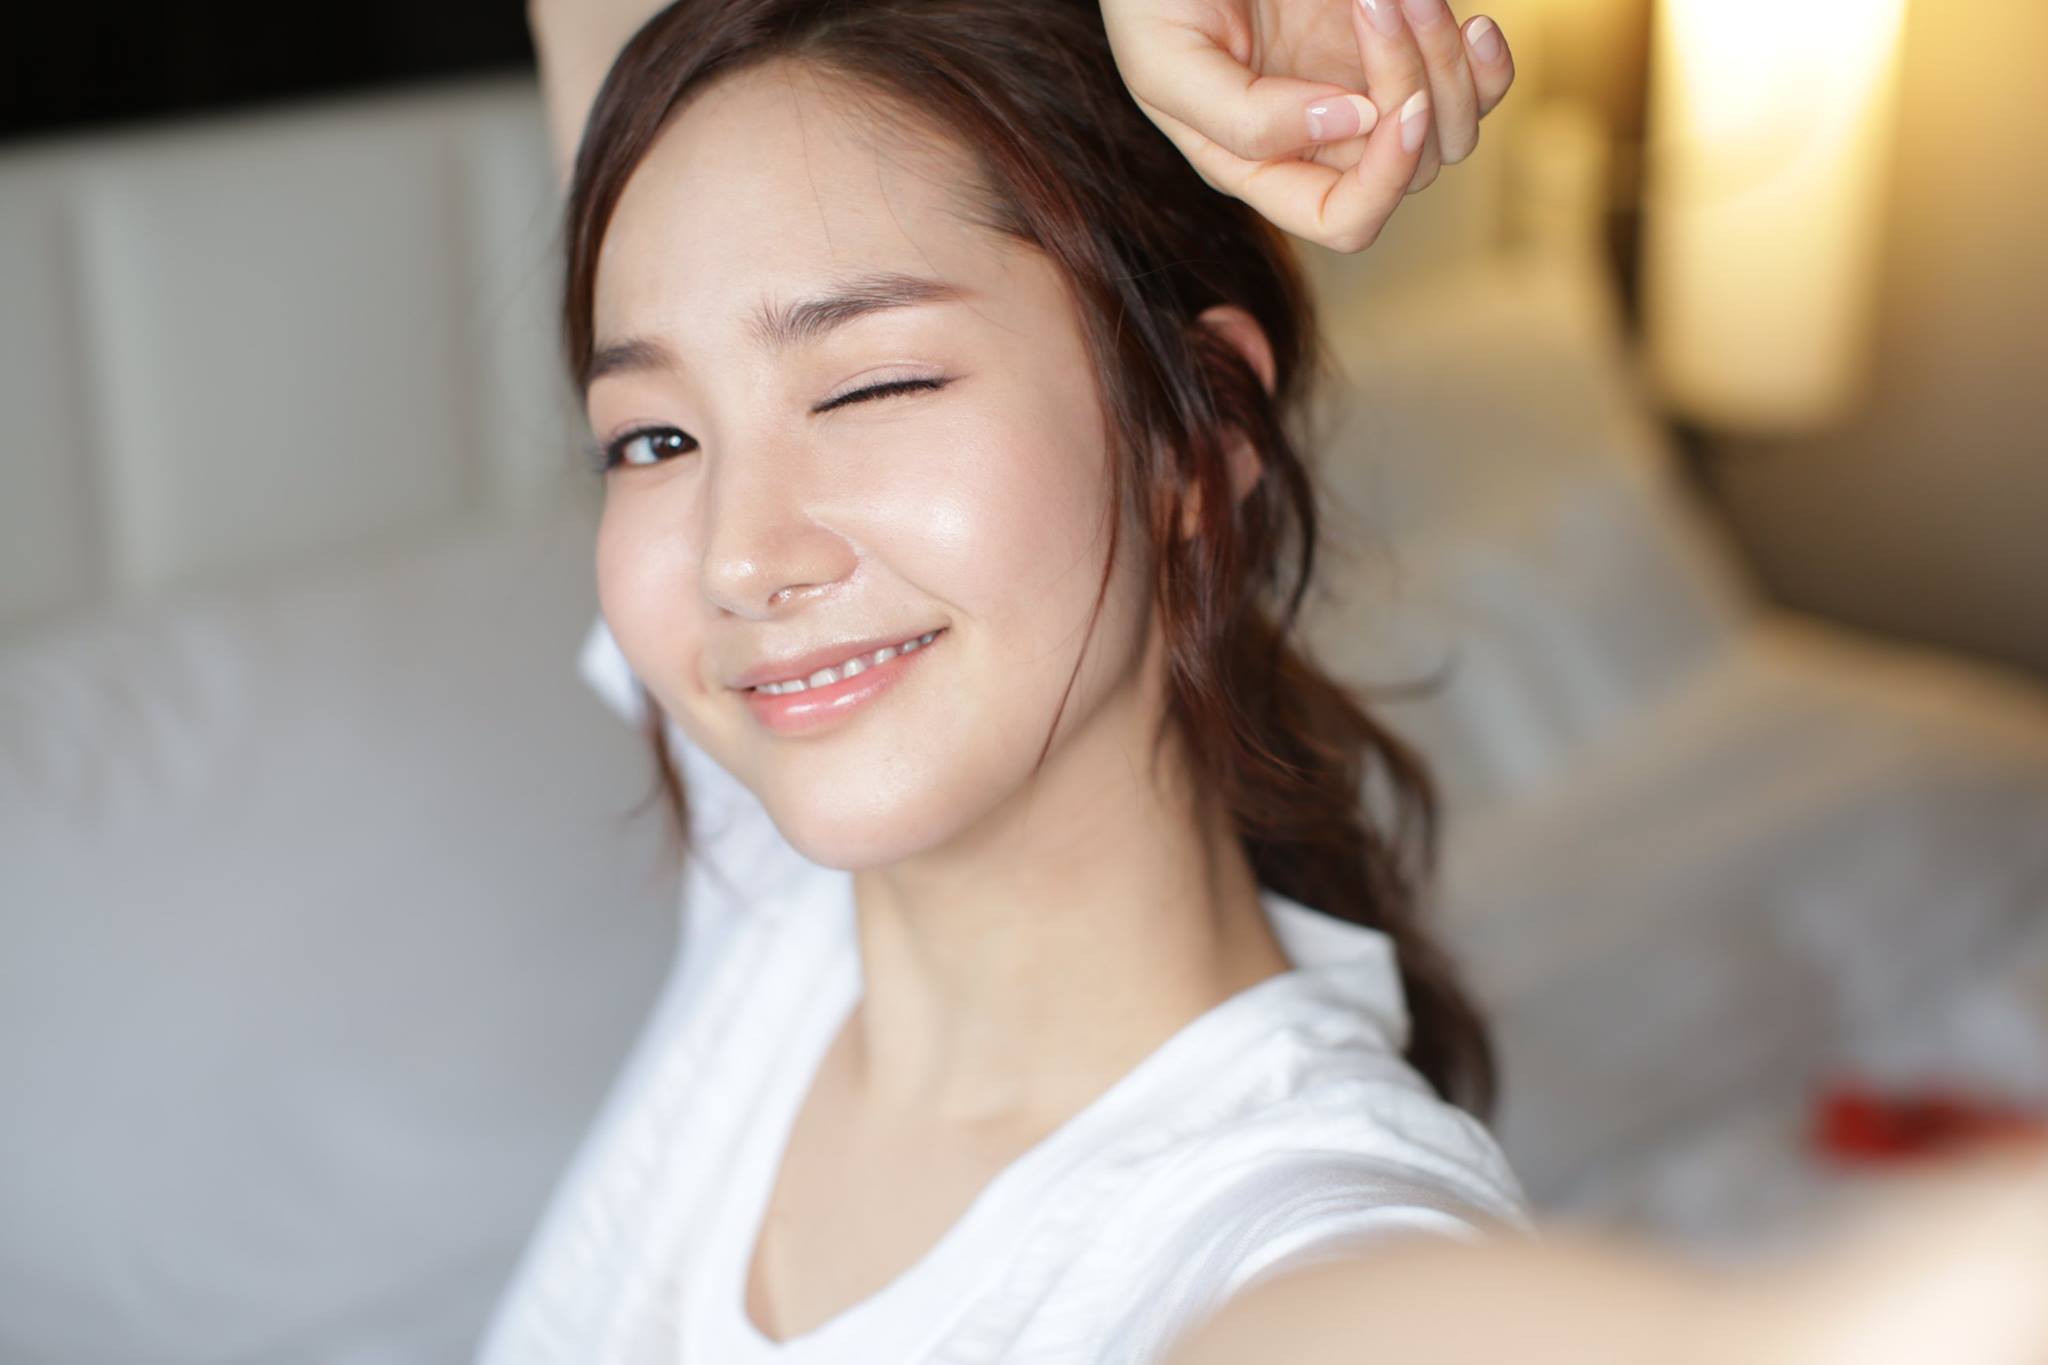 Park Min Young Wallpaper Image Photo Picture Background